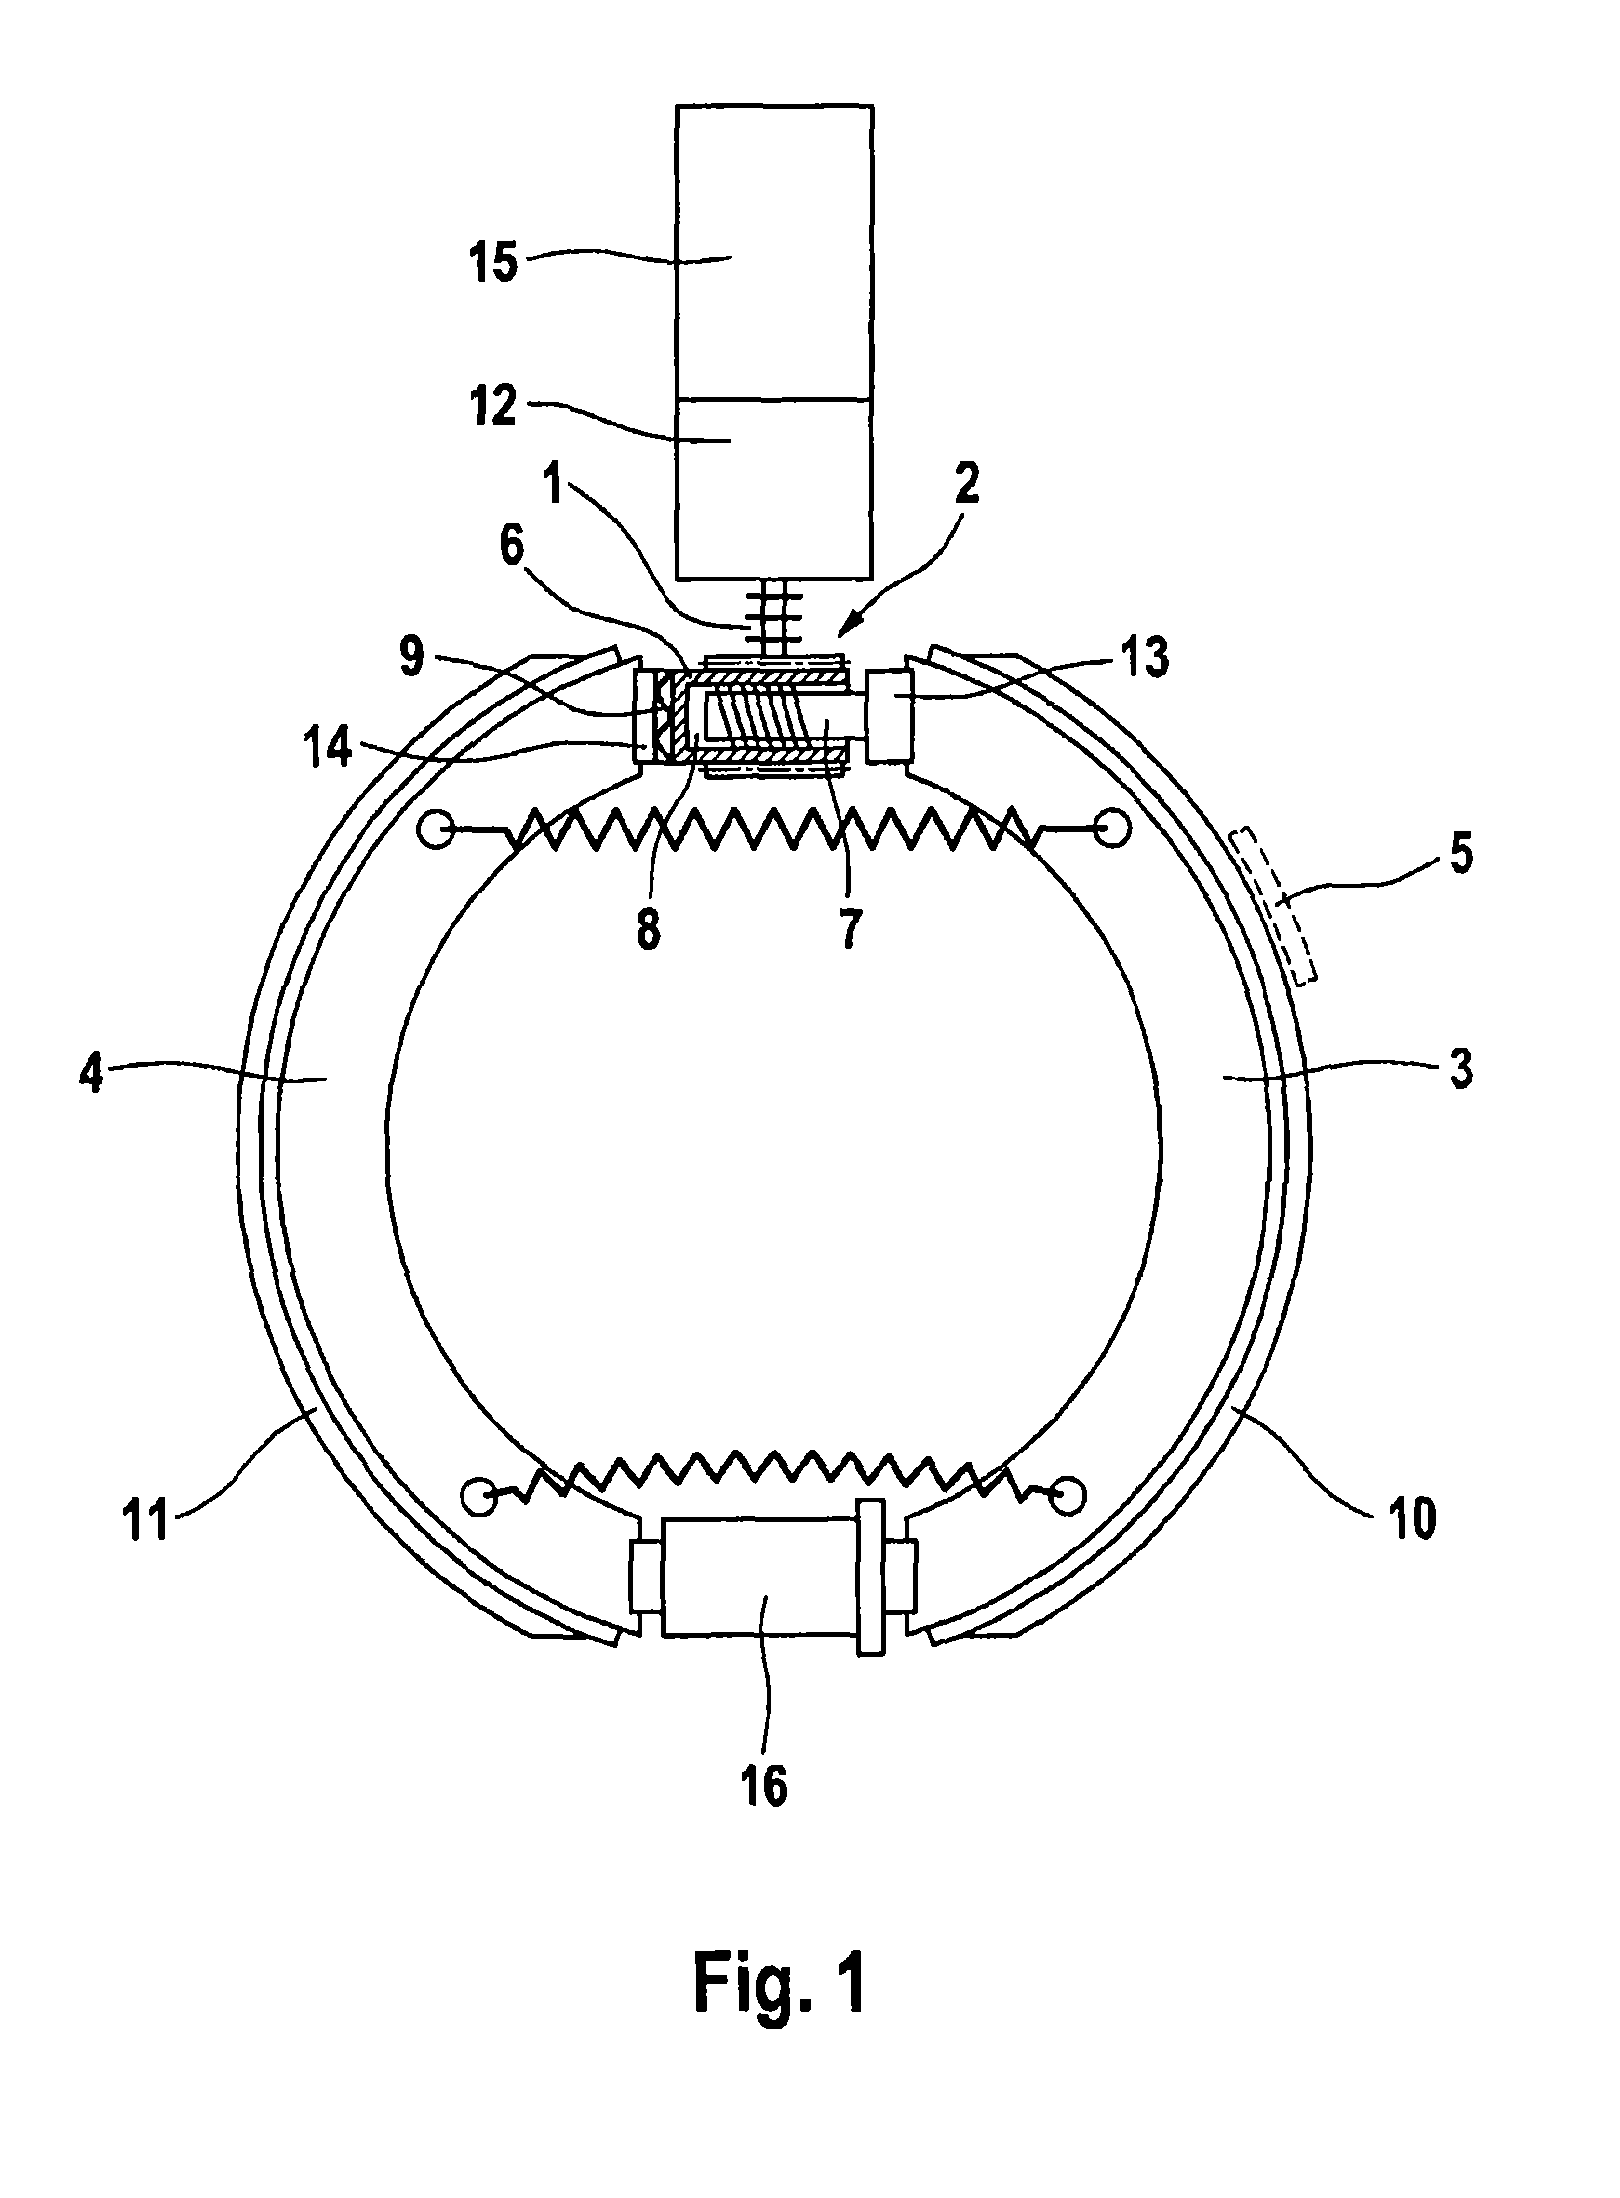 Method for the operation of an electromechanically operable parking brake